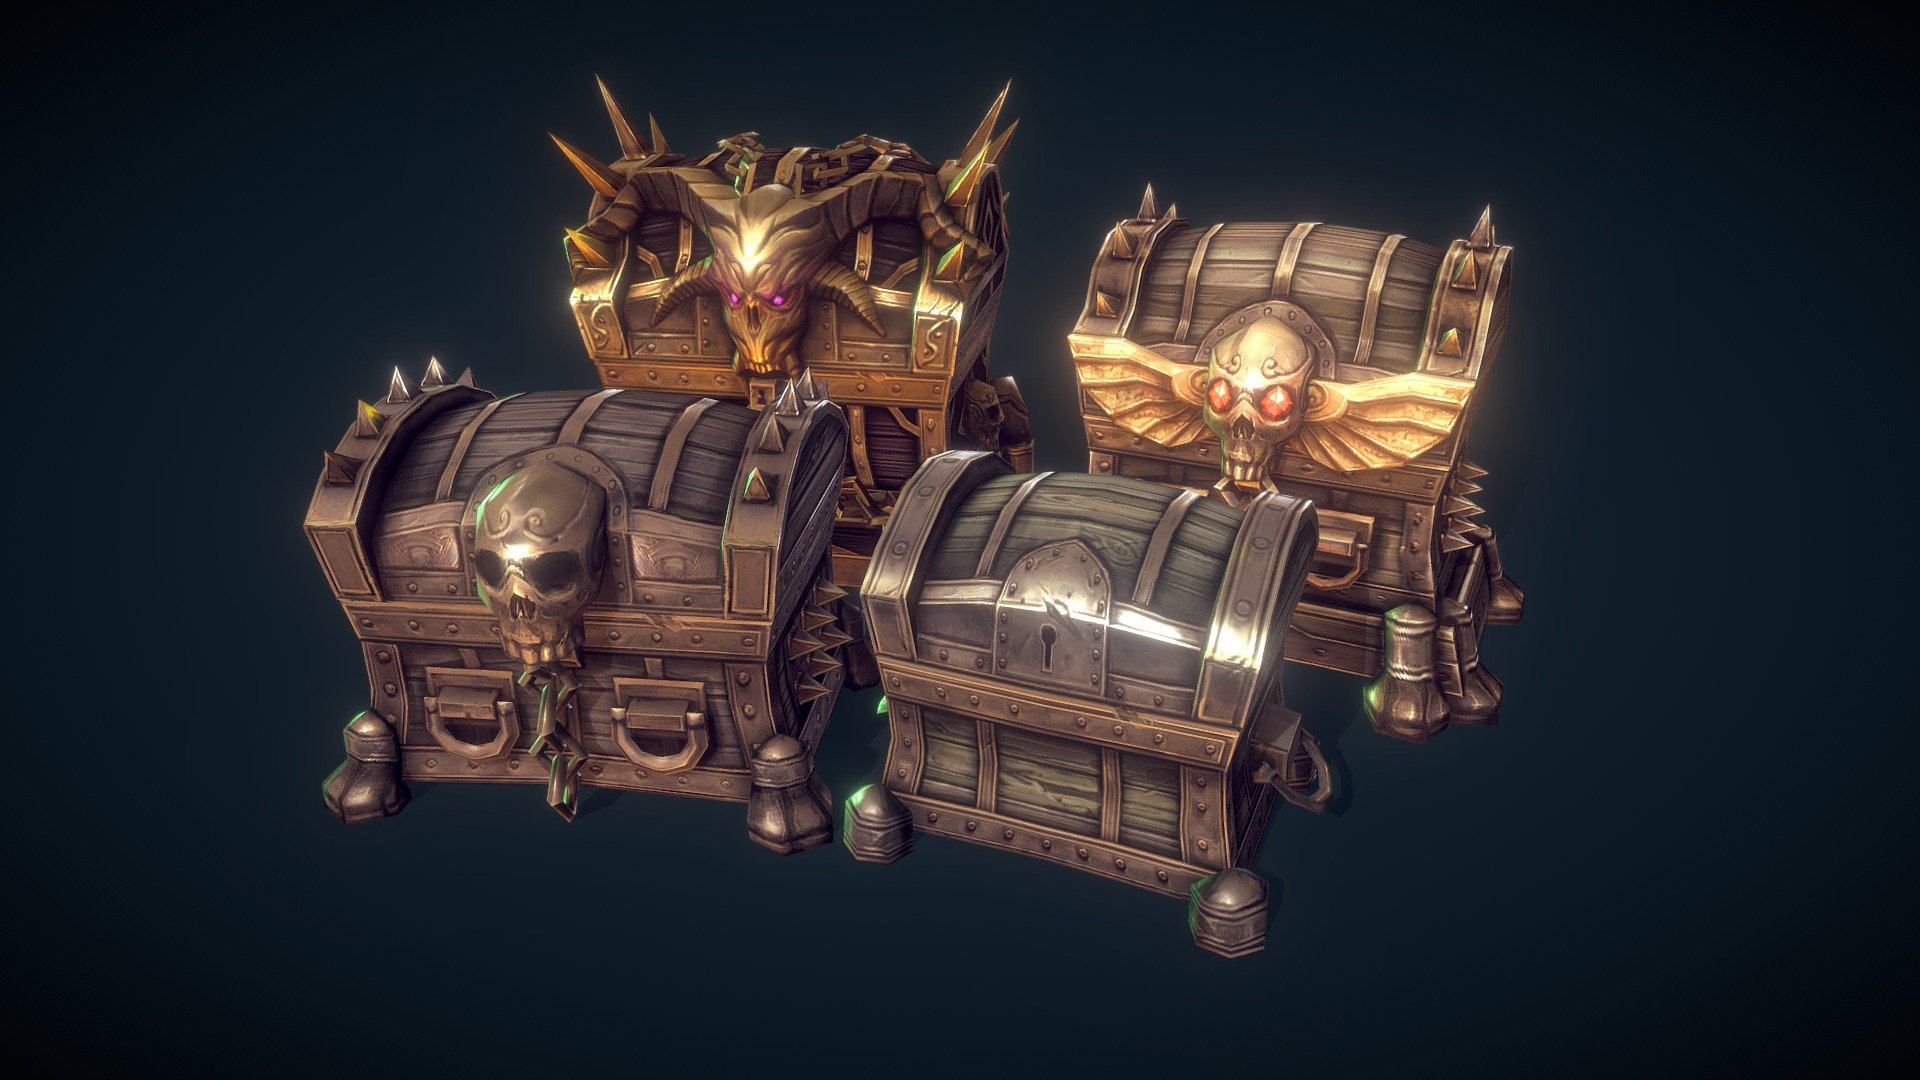 This set includes:




Treasure Chest Medium

Treasure Chest Small

Treasure Chest Large

Treasure Chest Epic

Follow the links and check out their animations! - Treasure Chests - Hand Painted Series - Buy Royalty Free 3D model by BitGem 3d model